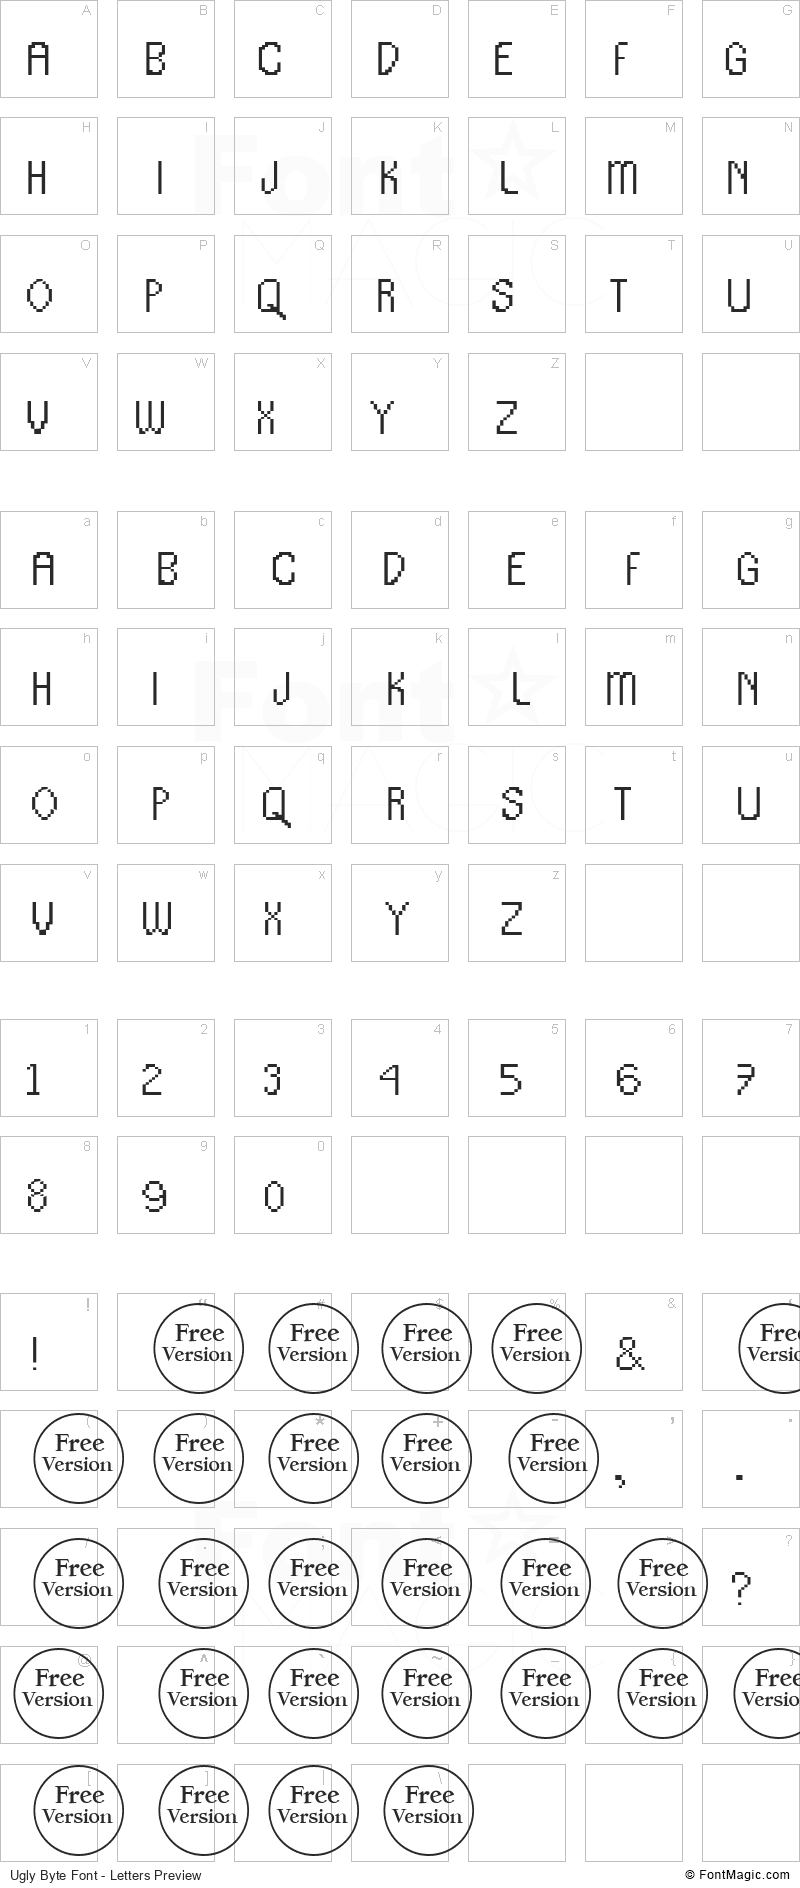 Ugly Byte Font - All Latters Preview Chart